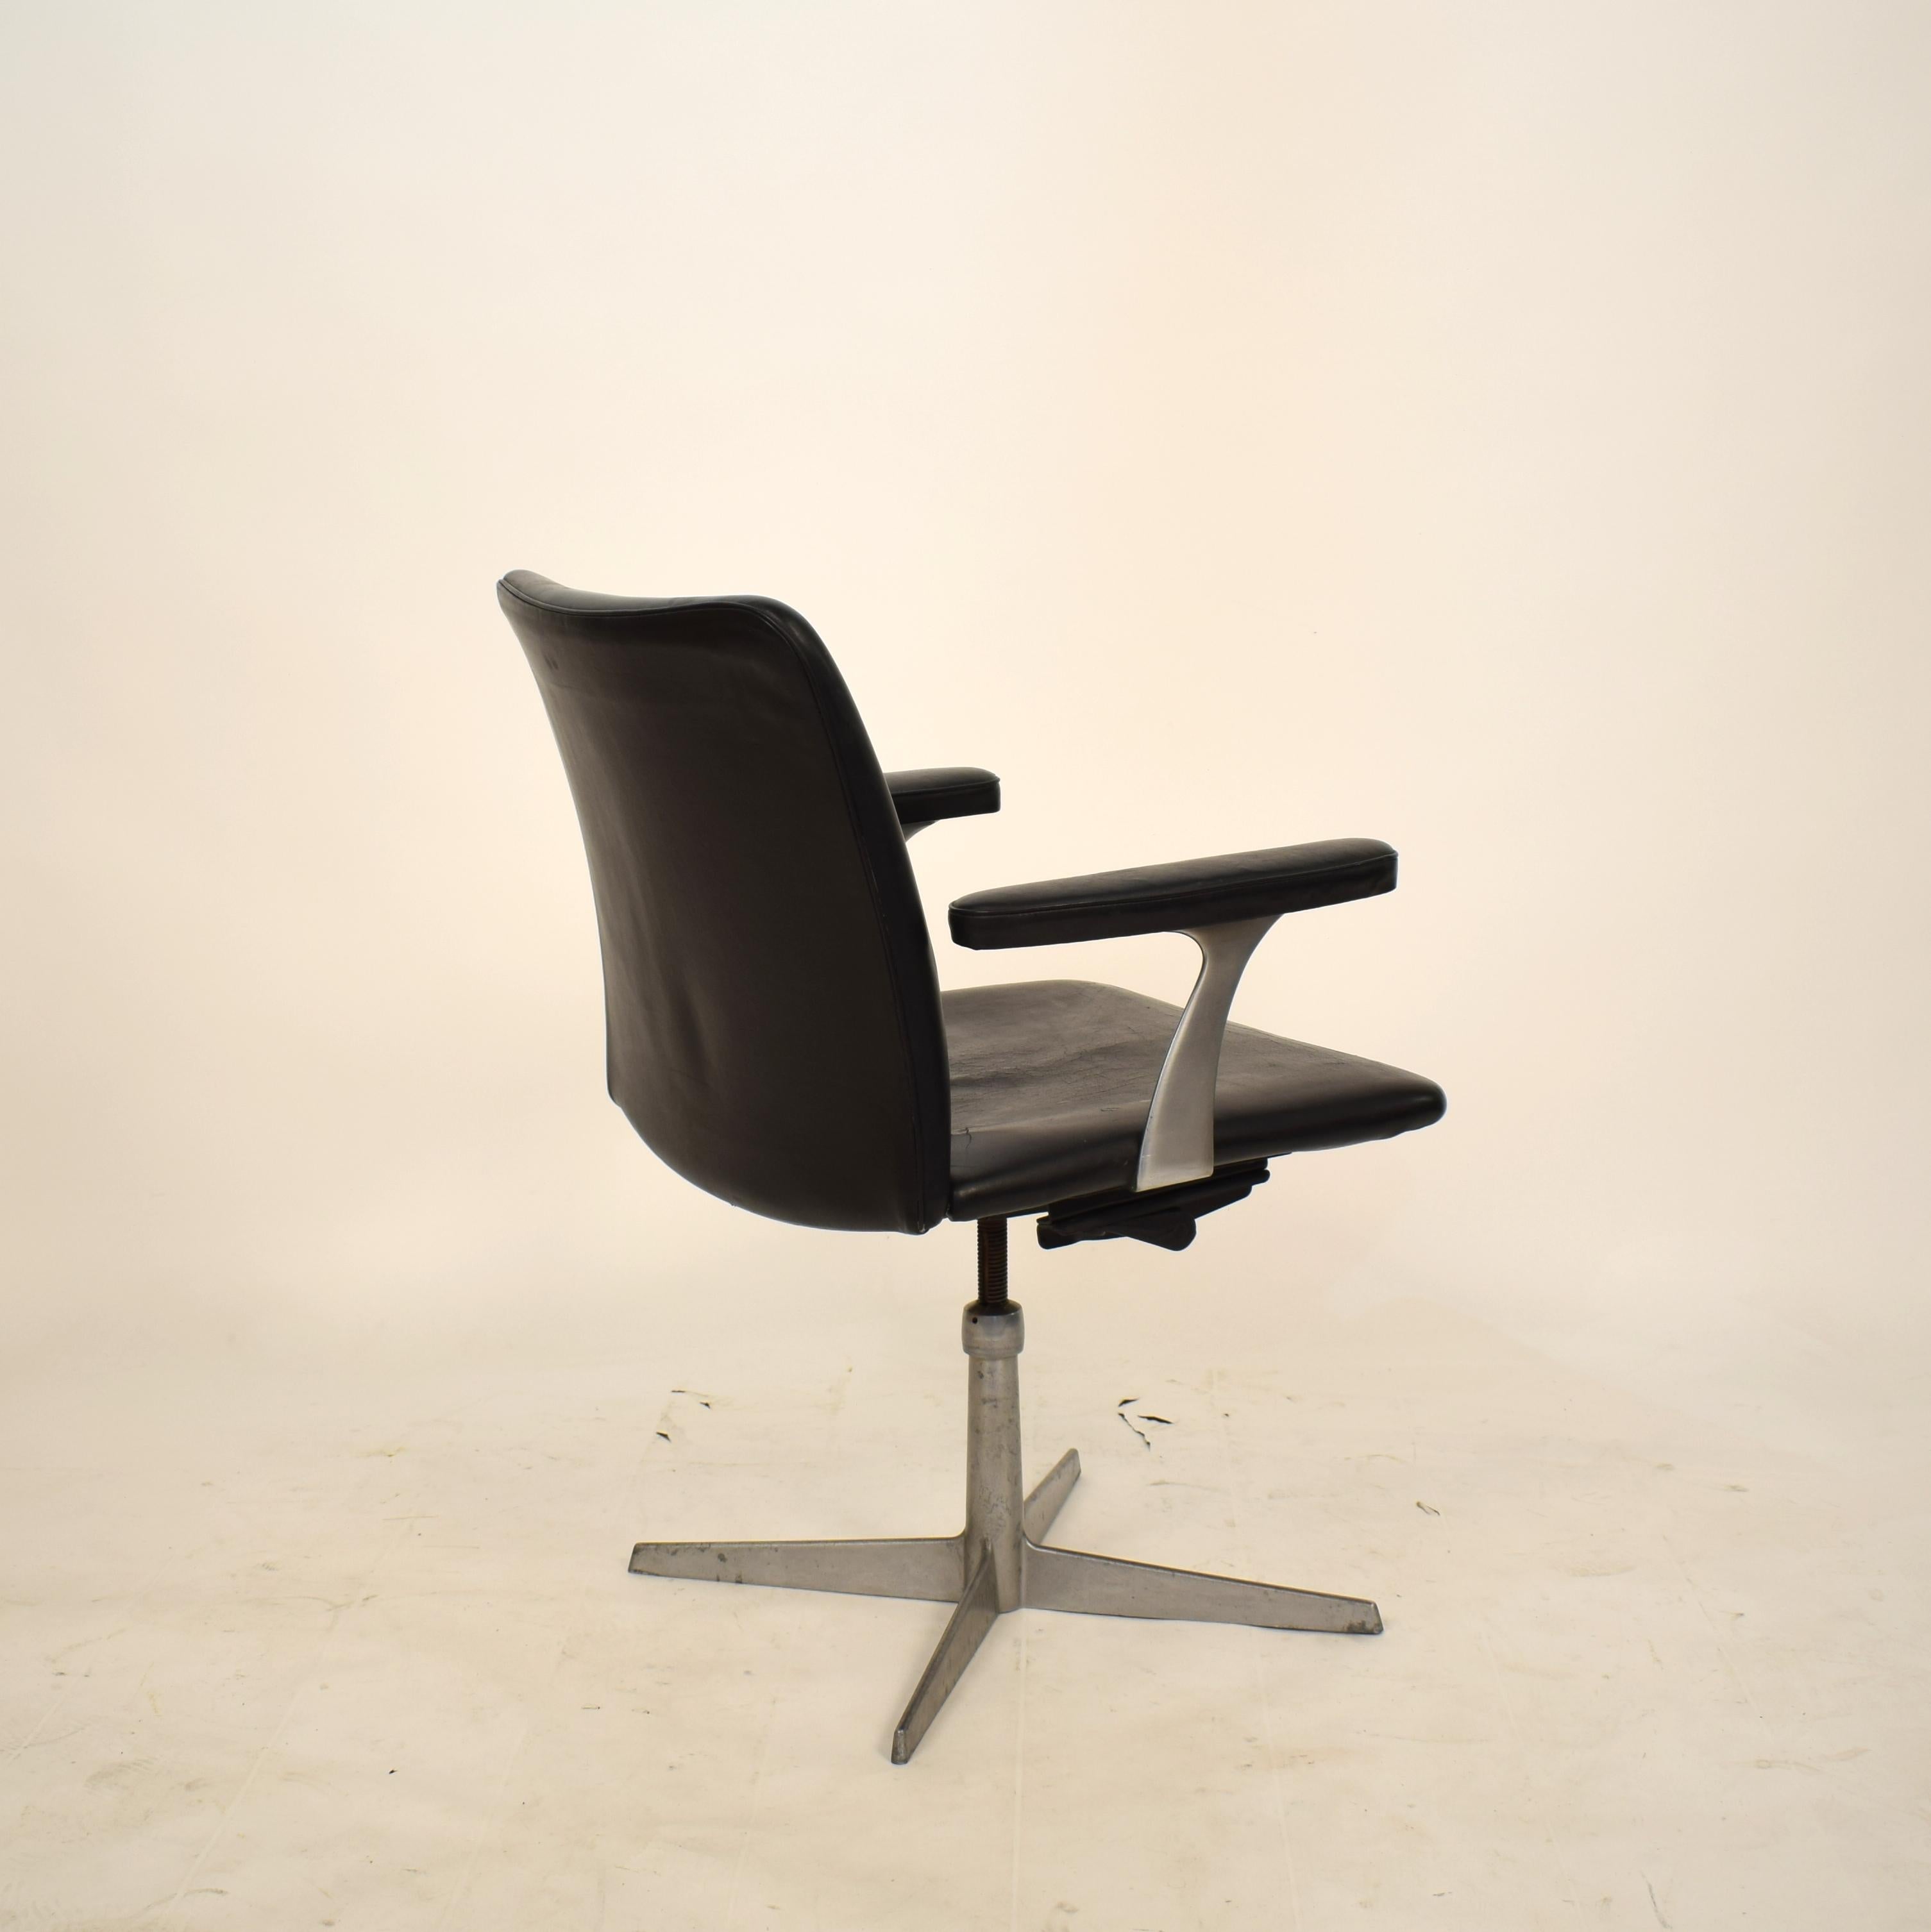 Midcentury Scandinavian Armchair in Black Leather and Aluminum, circa 1970 For Sale 5